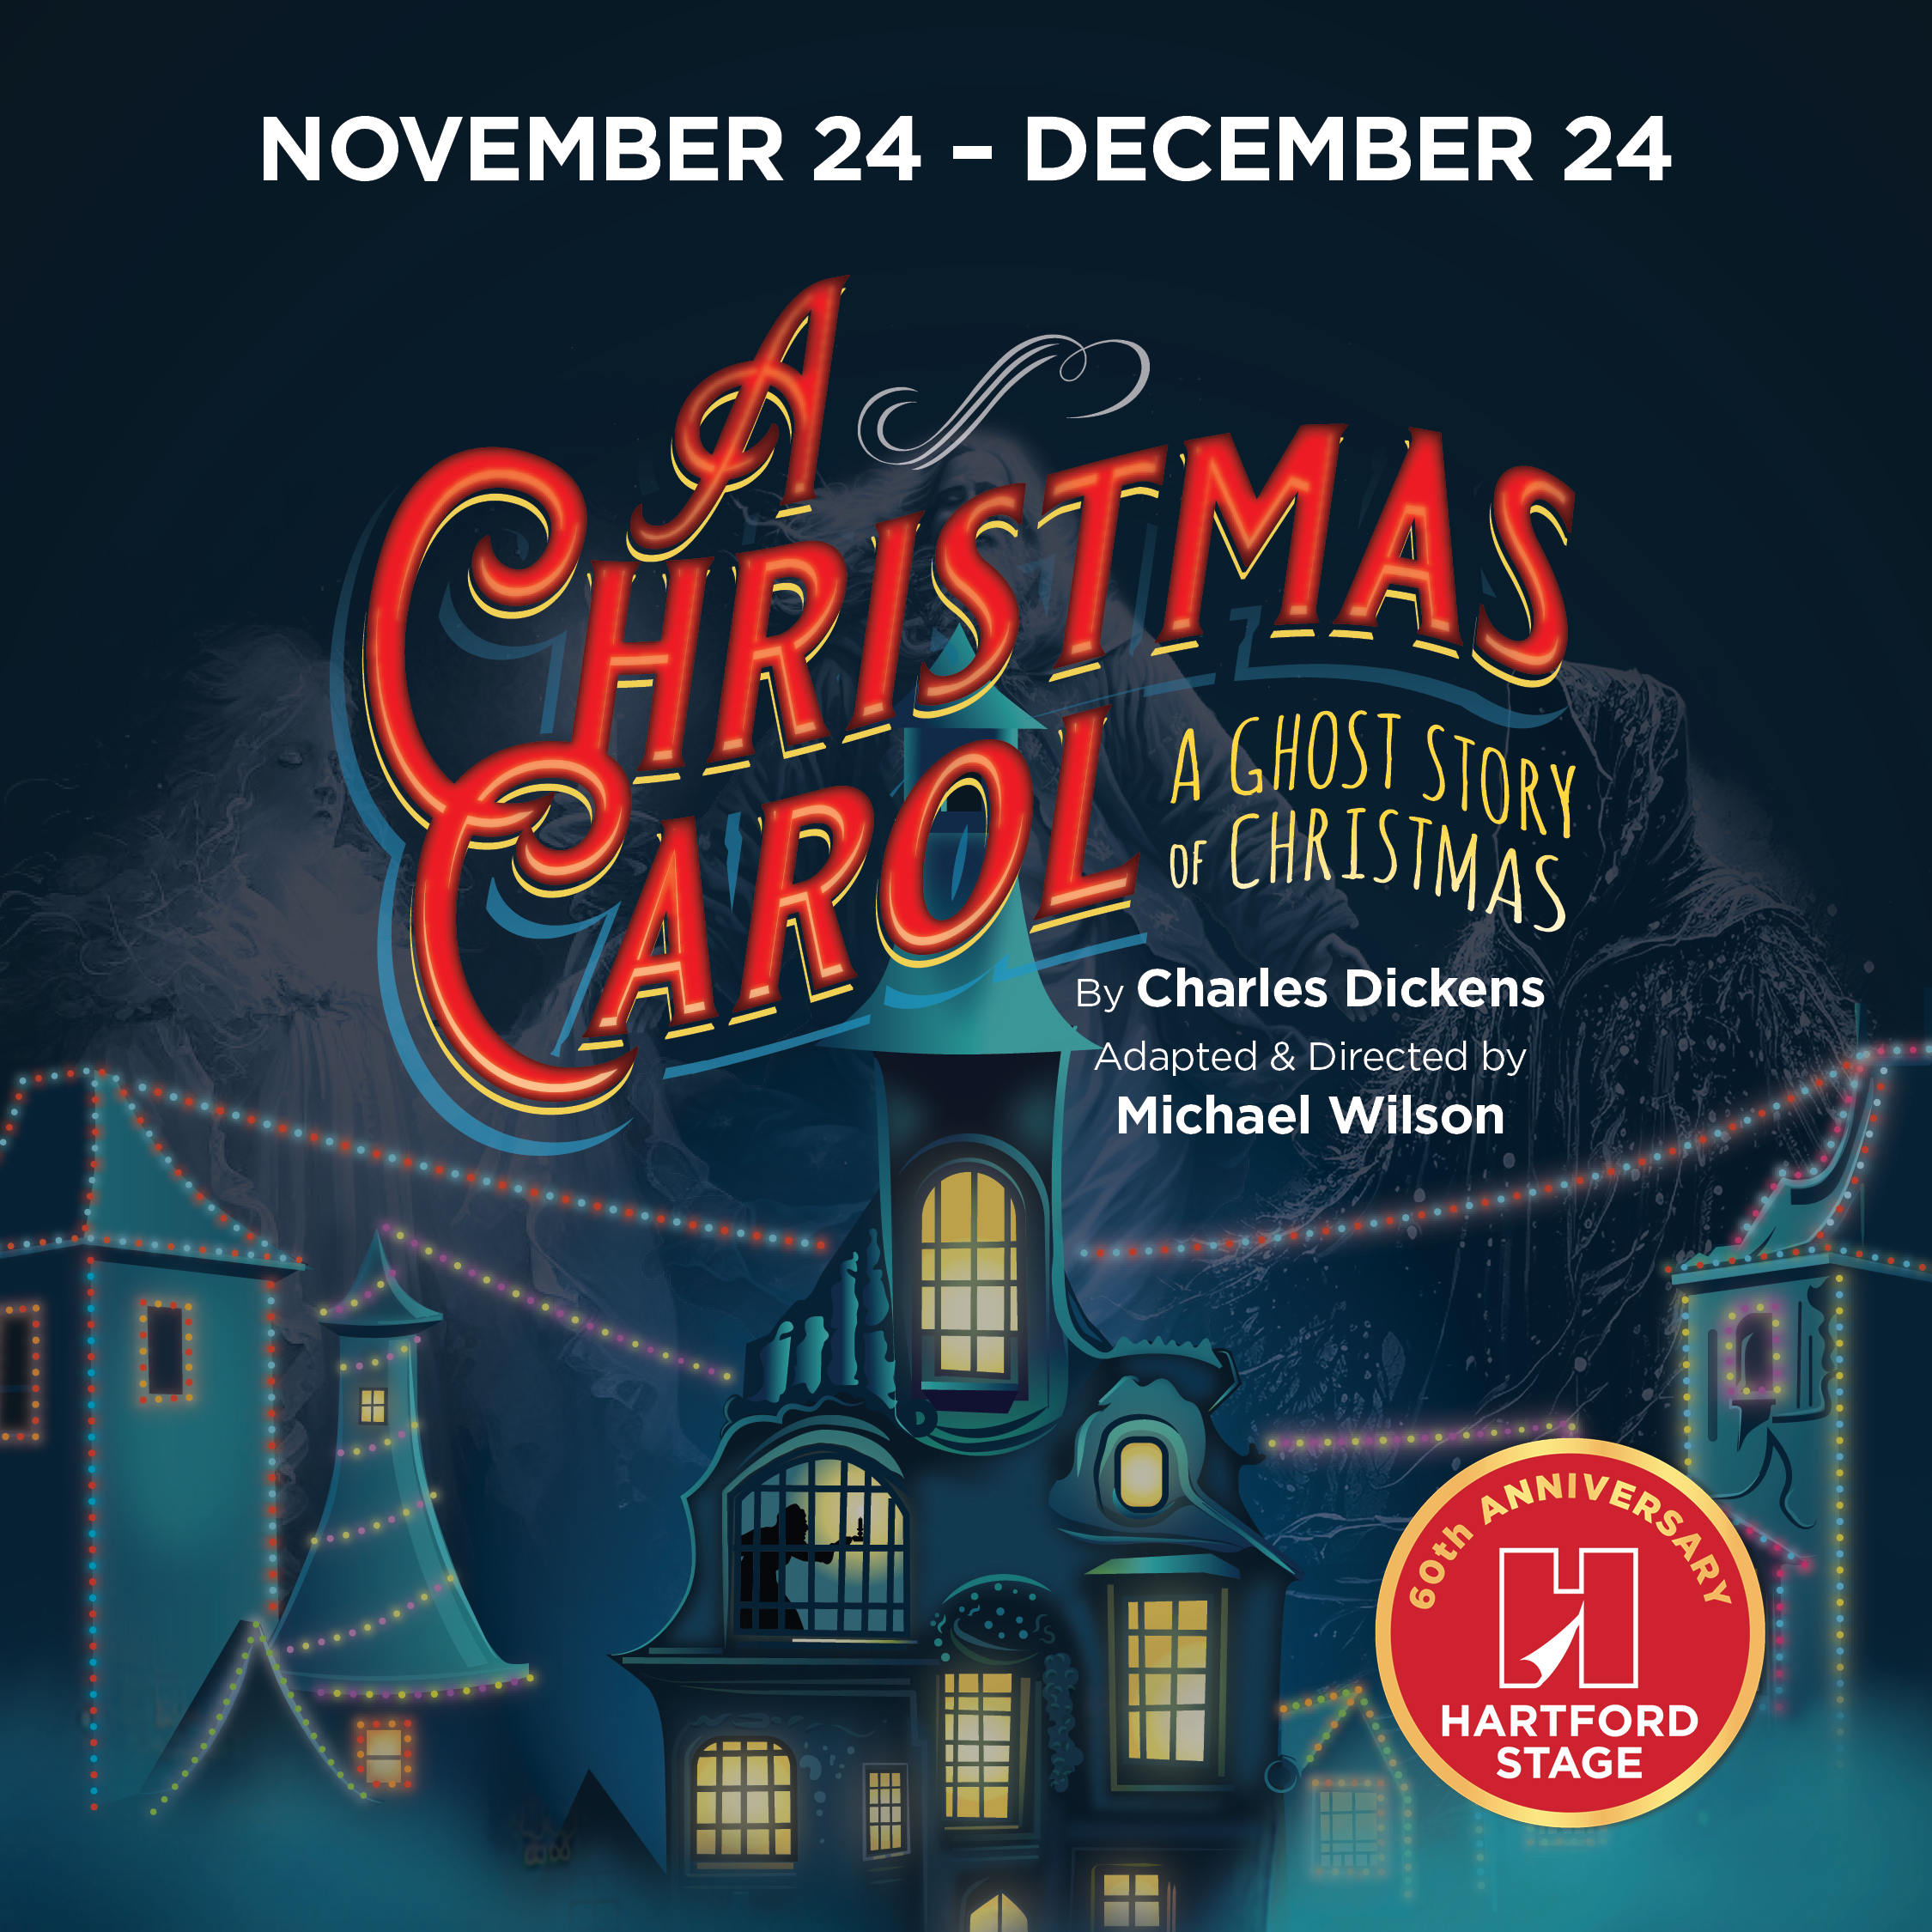 Hartford Stage's production of A Christmas Carol 